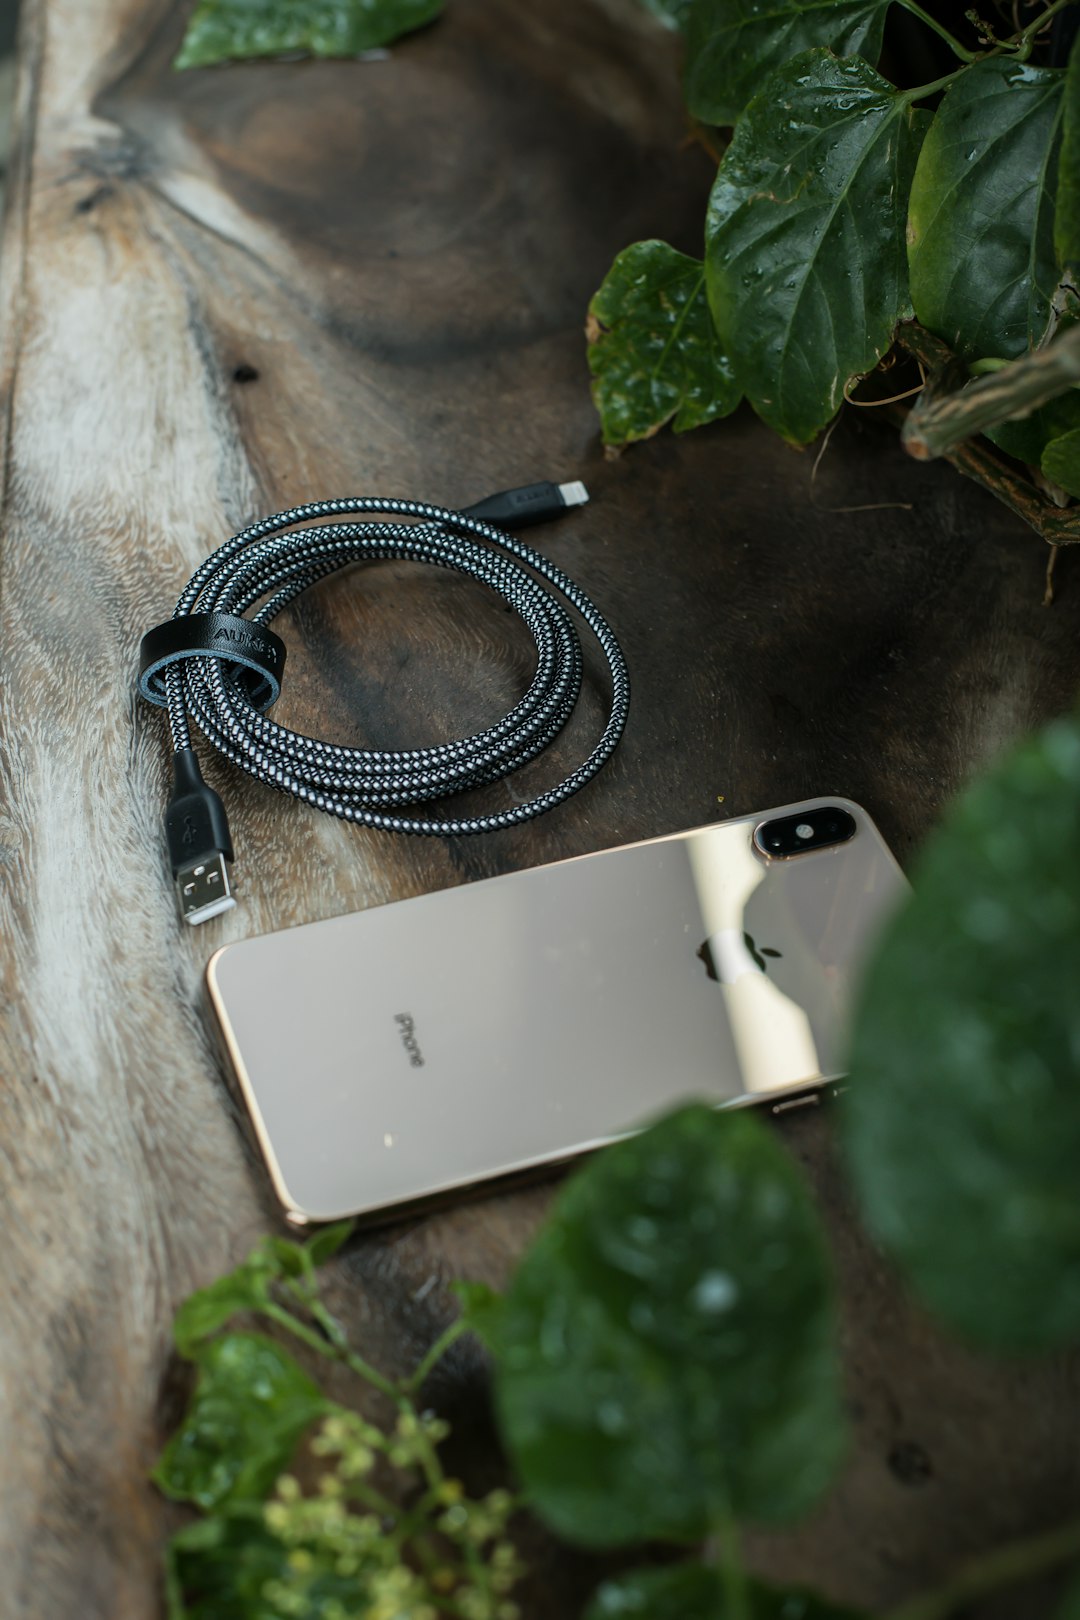 silver iPhone X beside USB cable